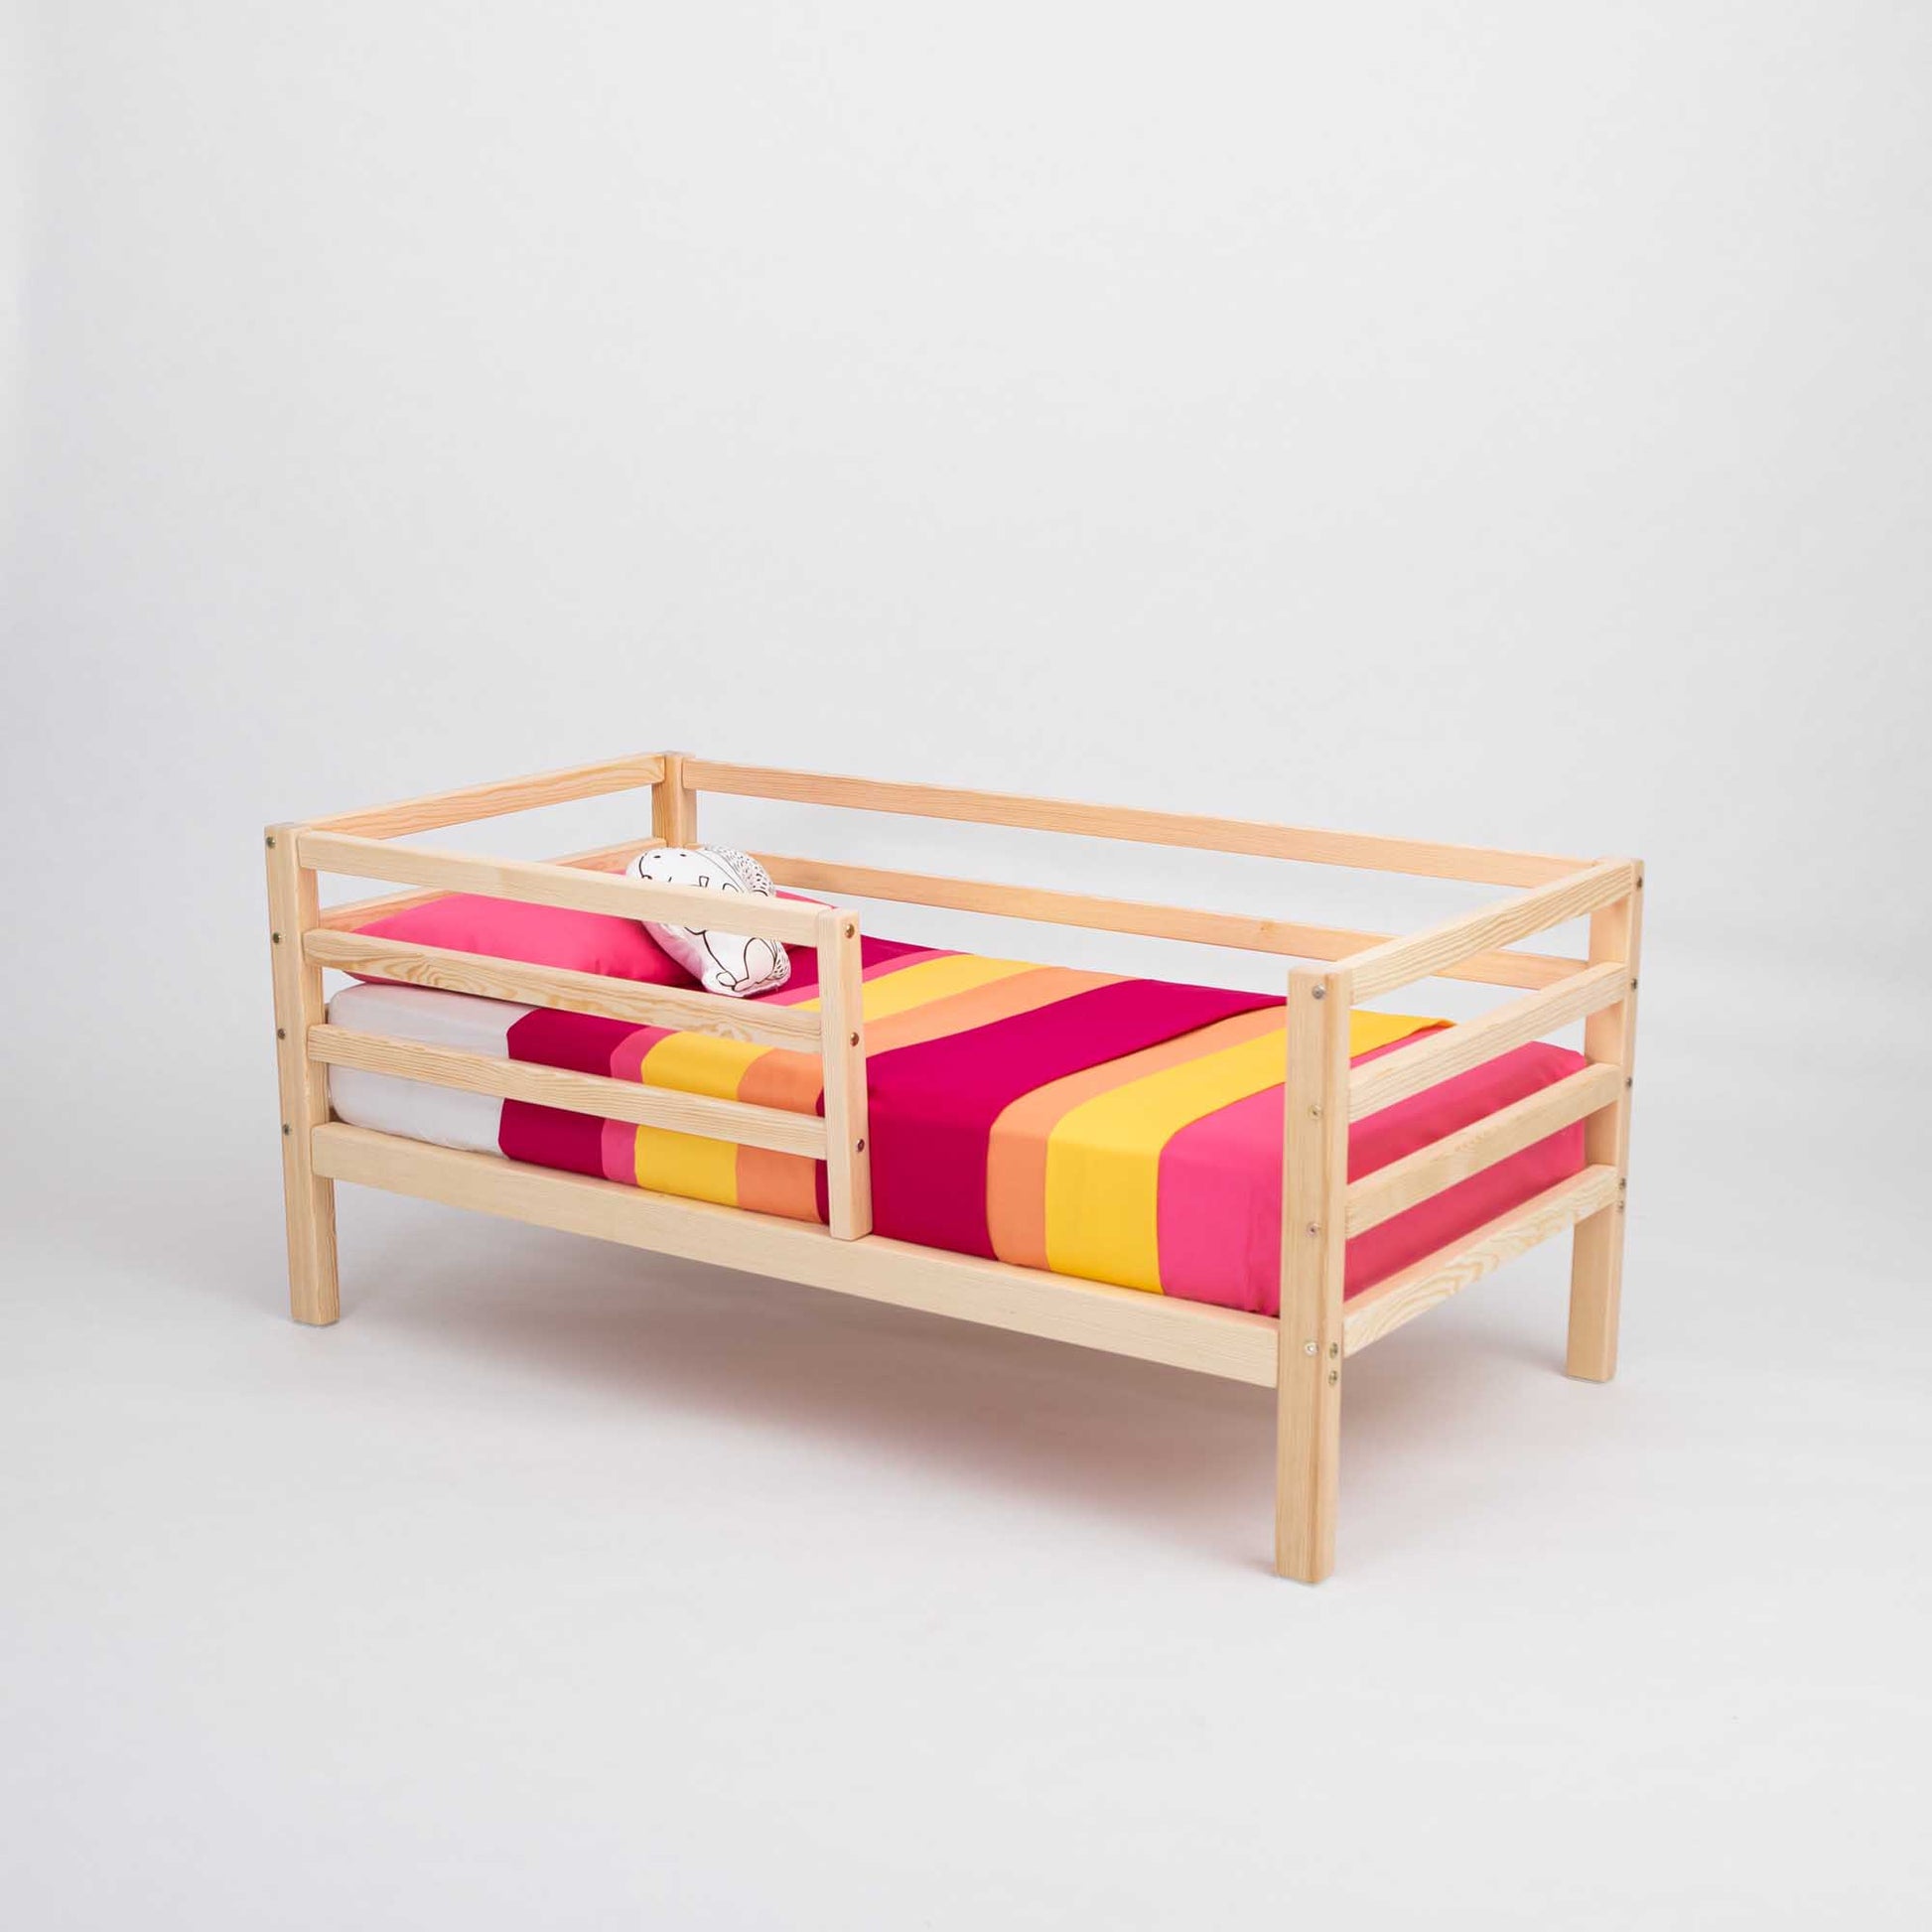 A Sweet Home From Wood kids' bed on legs with a horizontal rail fence and a pink and yellow striped blanket.